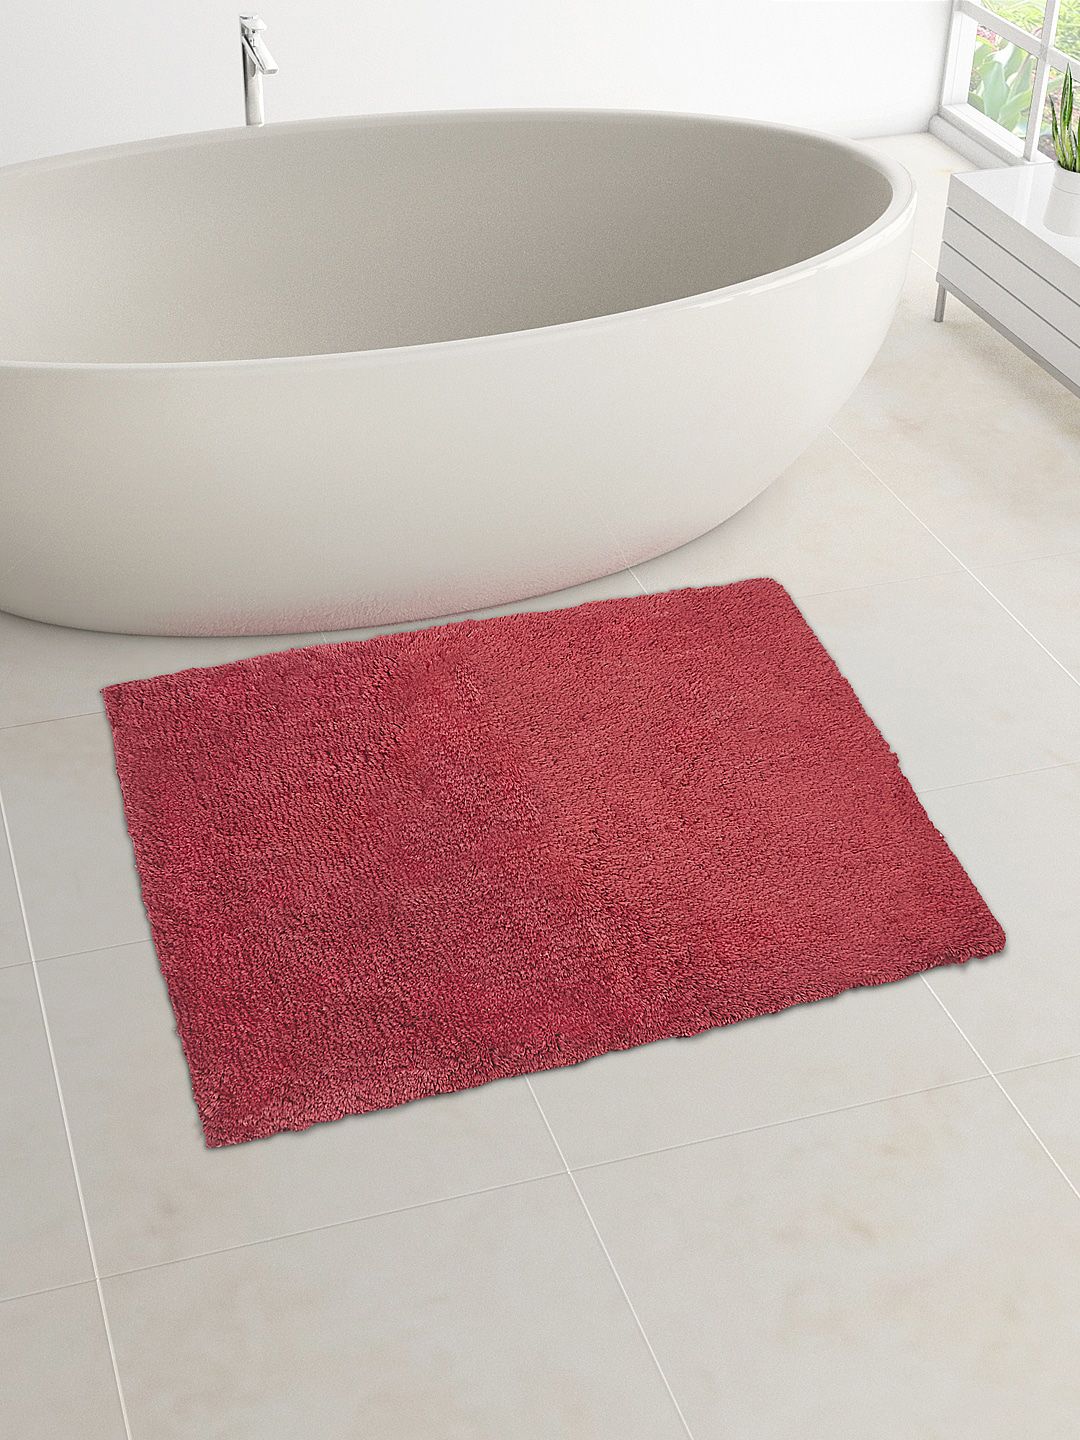 Living scapes by Pantaloons by Pantaloons by Pantaloons Maroon Solid Anti-Skid Bath Rug Price in India